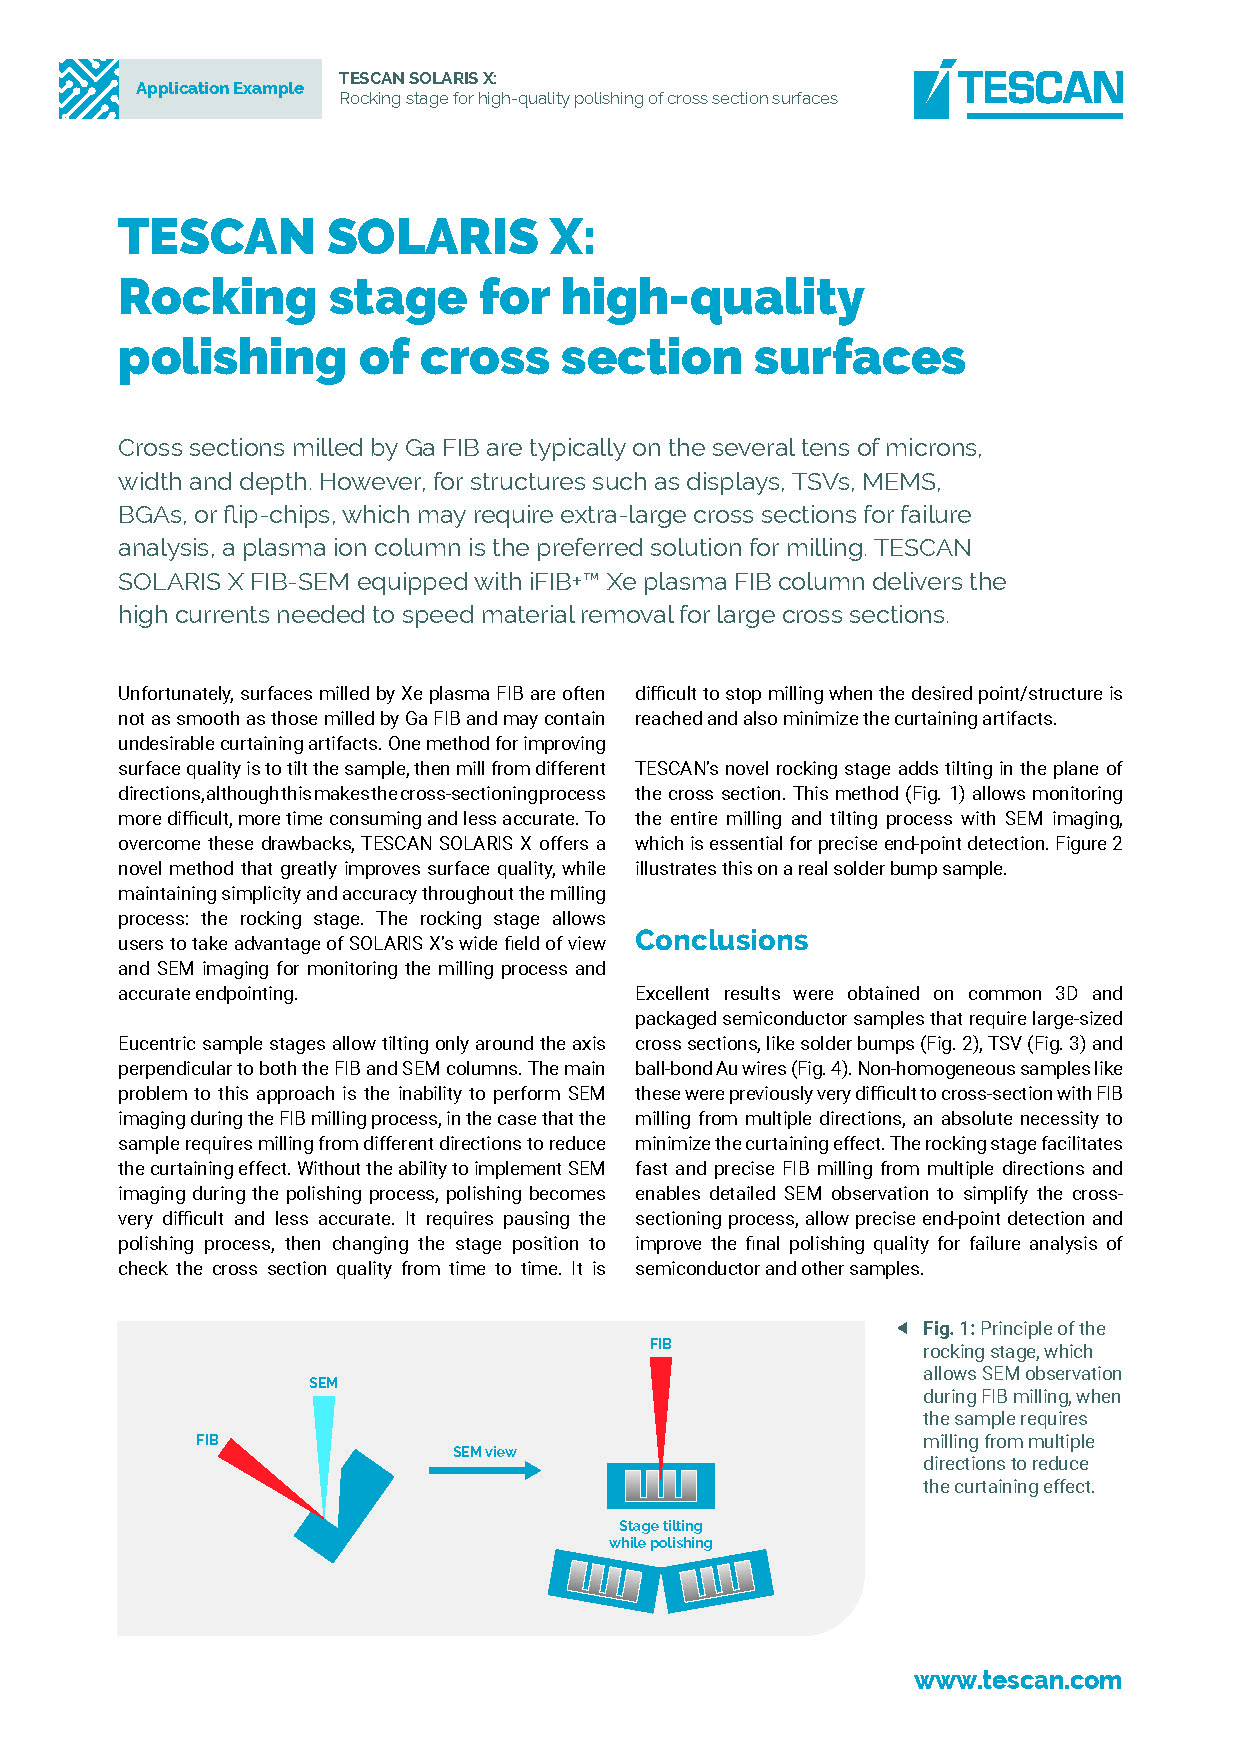 TESCAN-SOLARIS-X-Rocking-stage-for-high-quality-polishing-of-cross-section-surfaces_App-note_Page_1